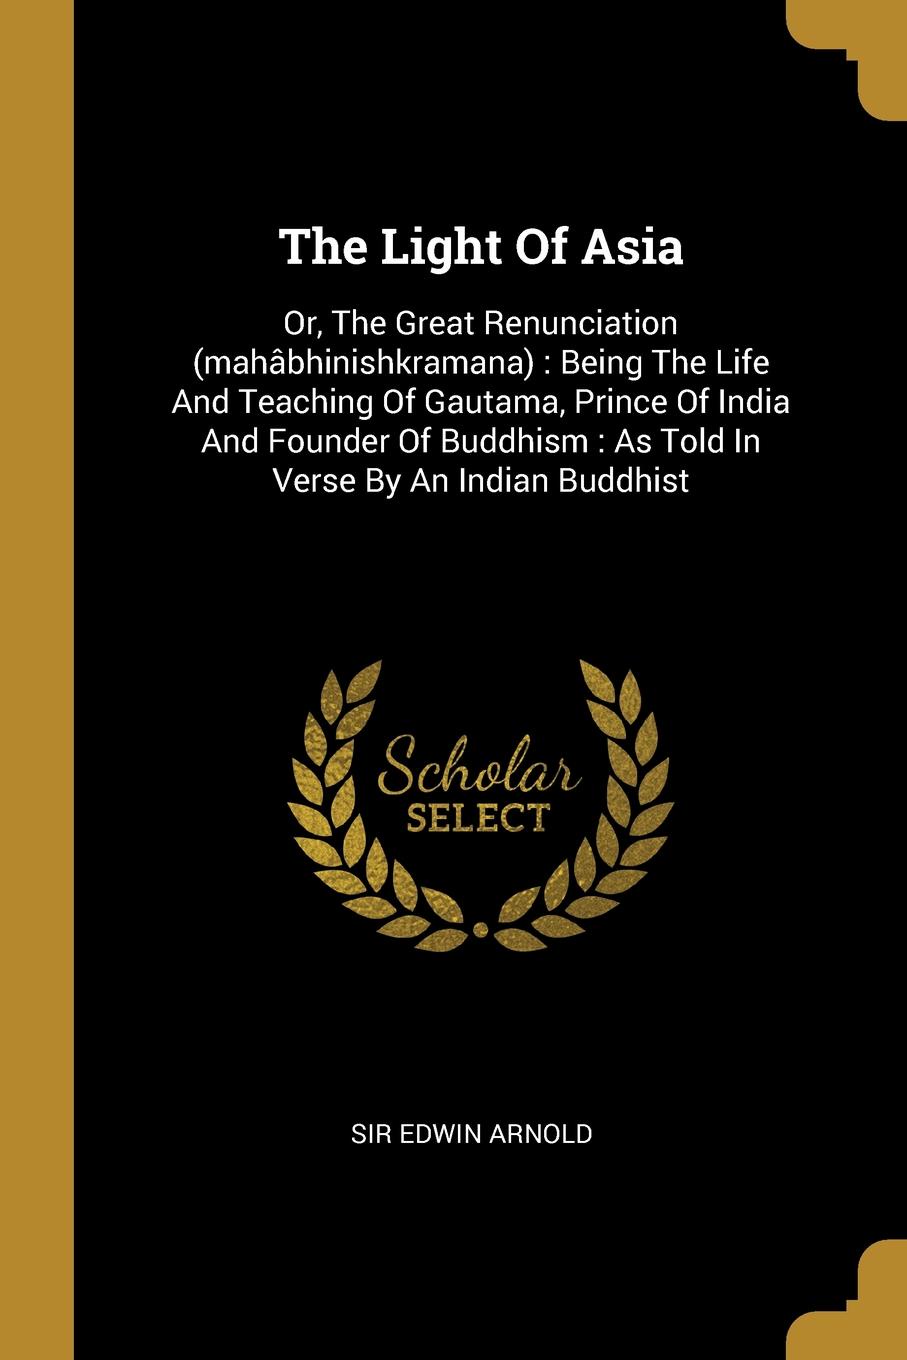 The Light Of Asia. Or, The Great Renunciation (mahabhinishkramana) : Being The Life And Teaching Of Gautama, Prince Of India And Founder Of Buddhism : As Told In Verse By An Indian Buddhist